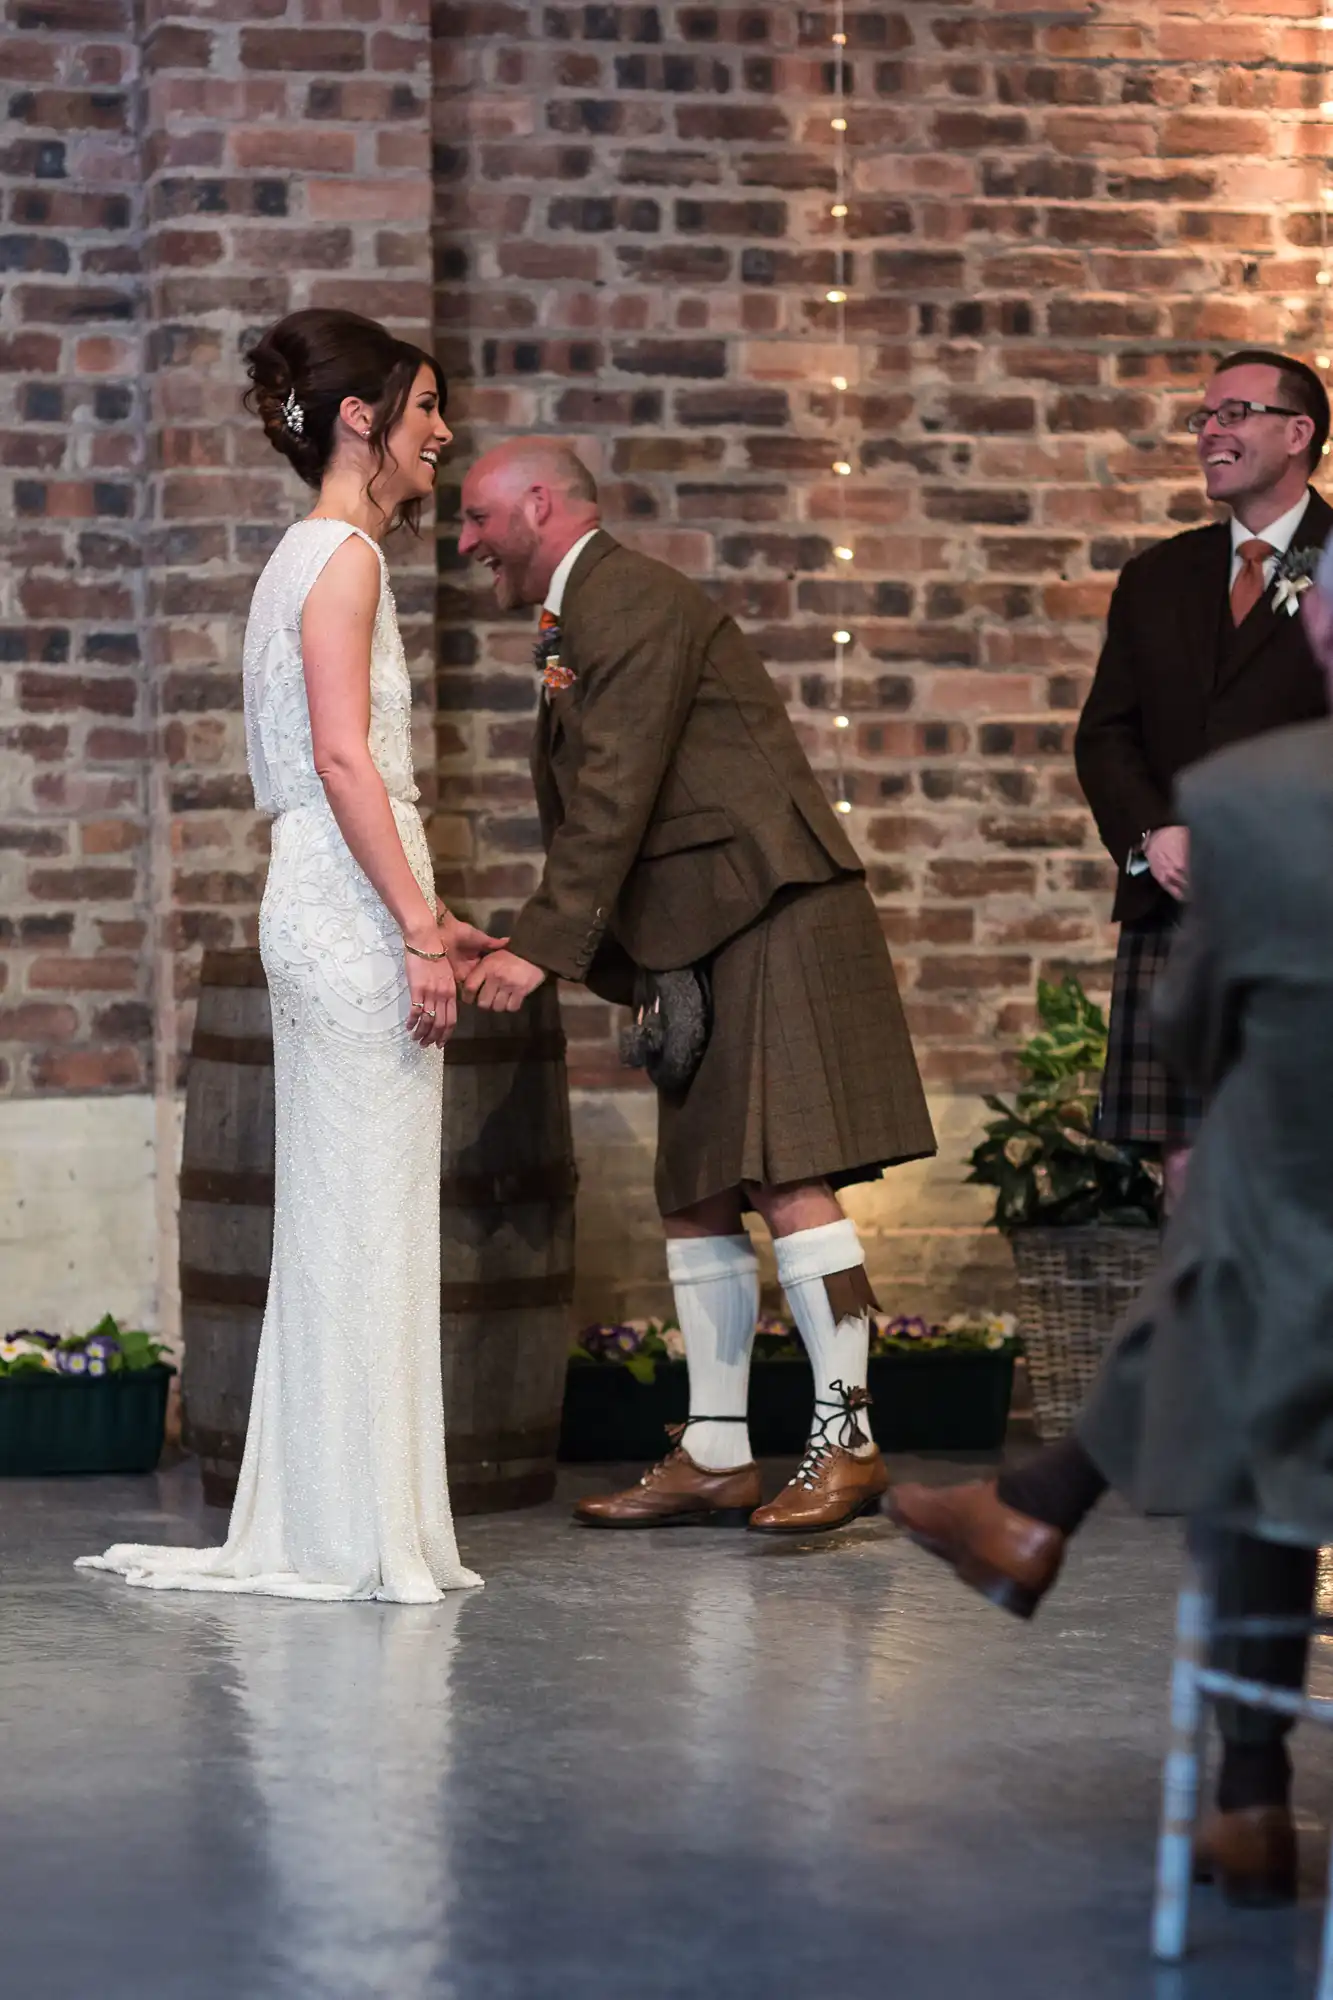 Bride in a white dress smiling at a groom in a kilt during a wedding ceremony, with a brick wall background and a guest watching.